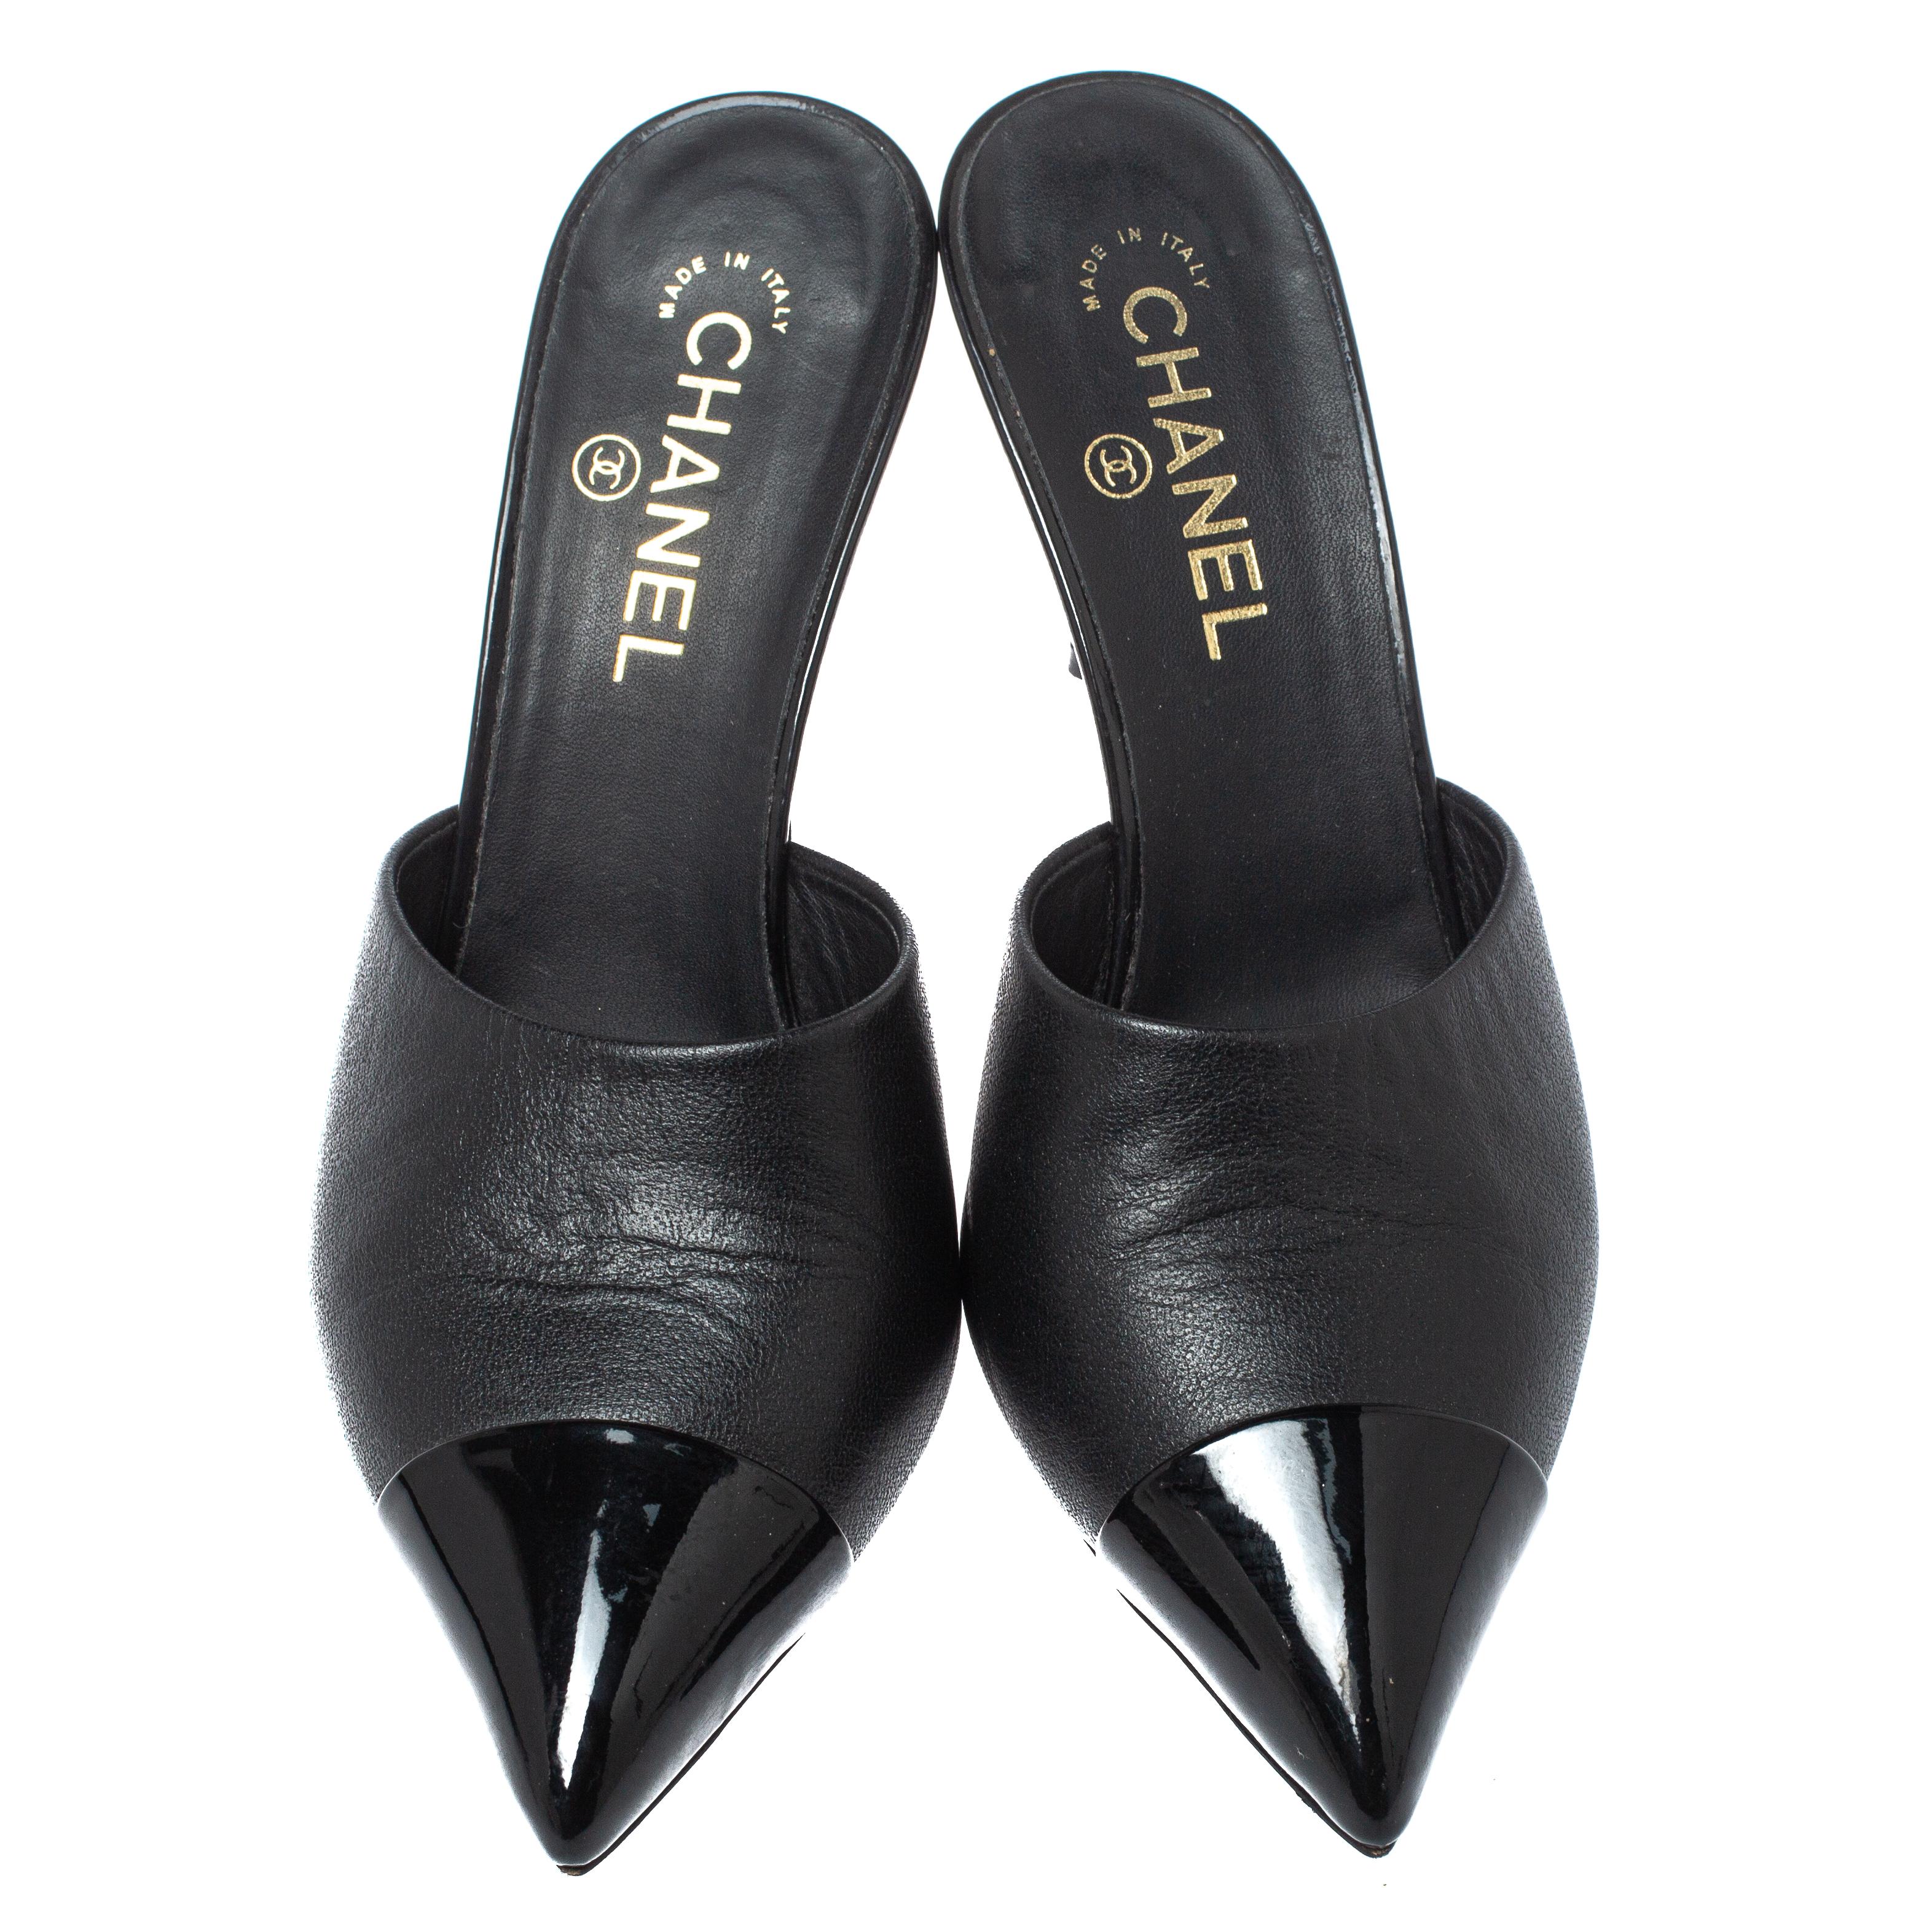 How can one not be smitten by these stunning mules by Chanel! In a magical blend of luxury and high-fashion, the mules come crafted from black leather and designed with patent leather pointed toes and the CC faux pearls on the heels add the perfect